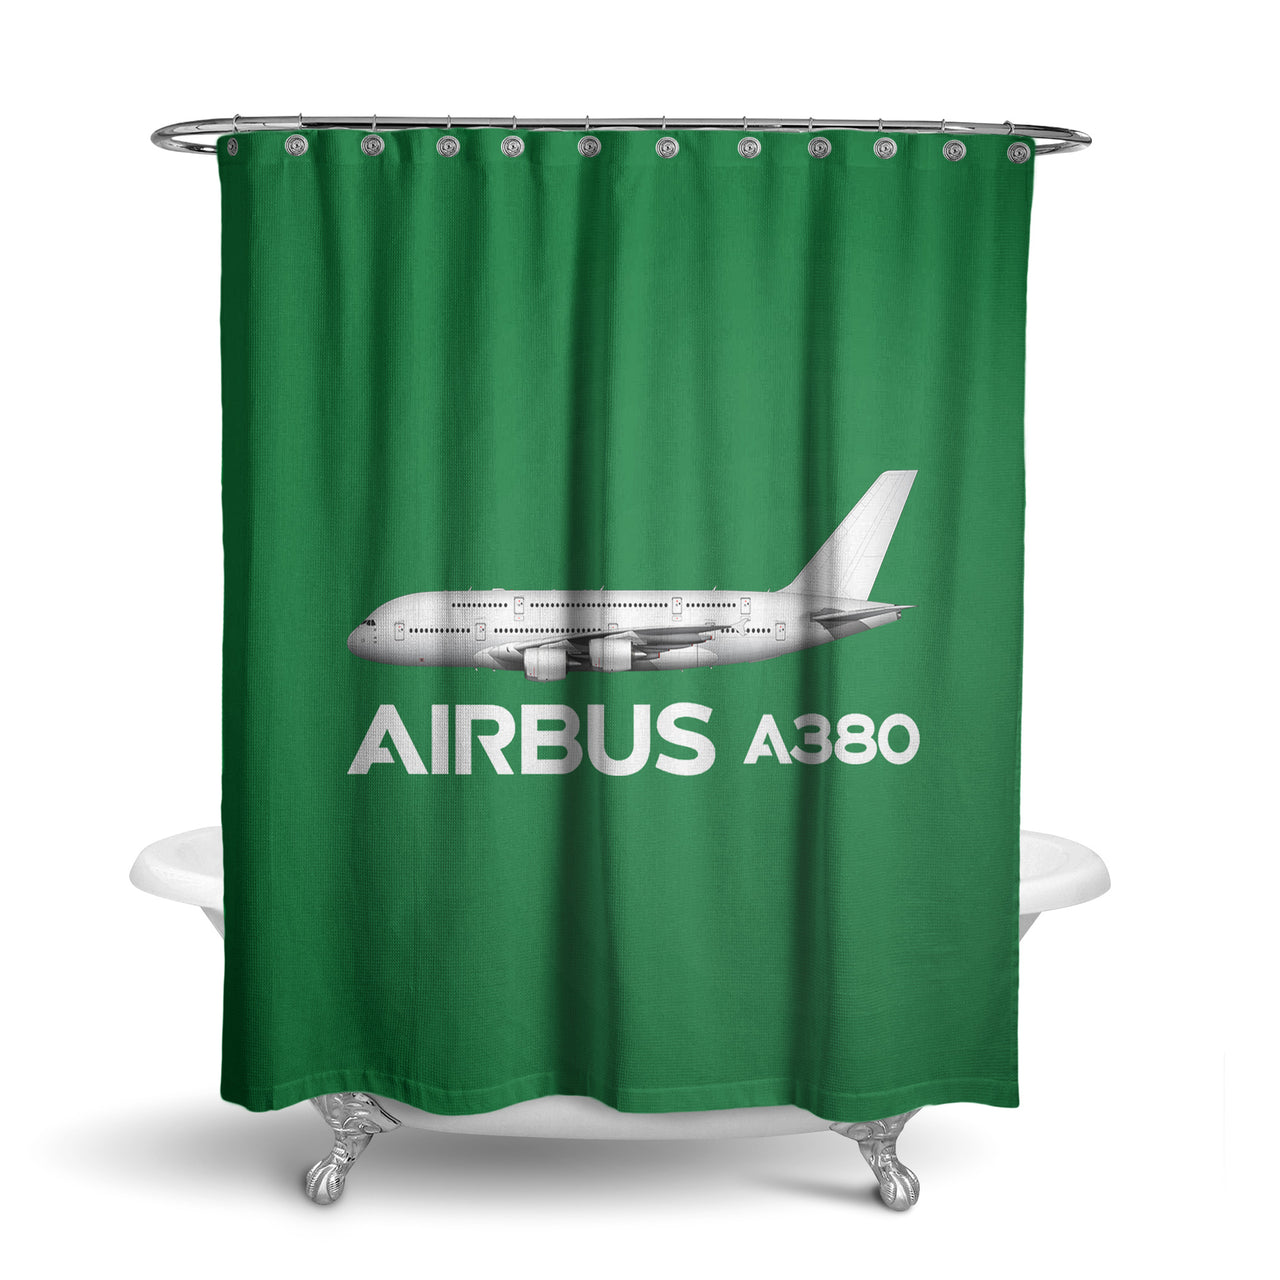 The Airbus A380 Designed Shower Curtains